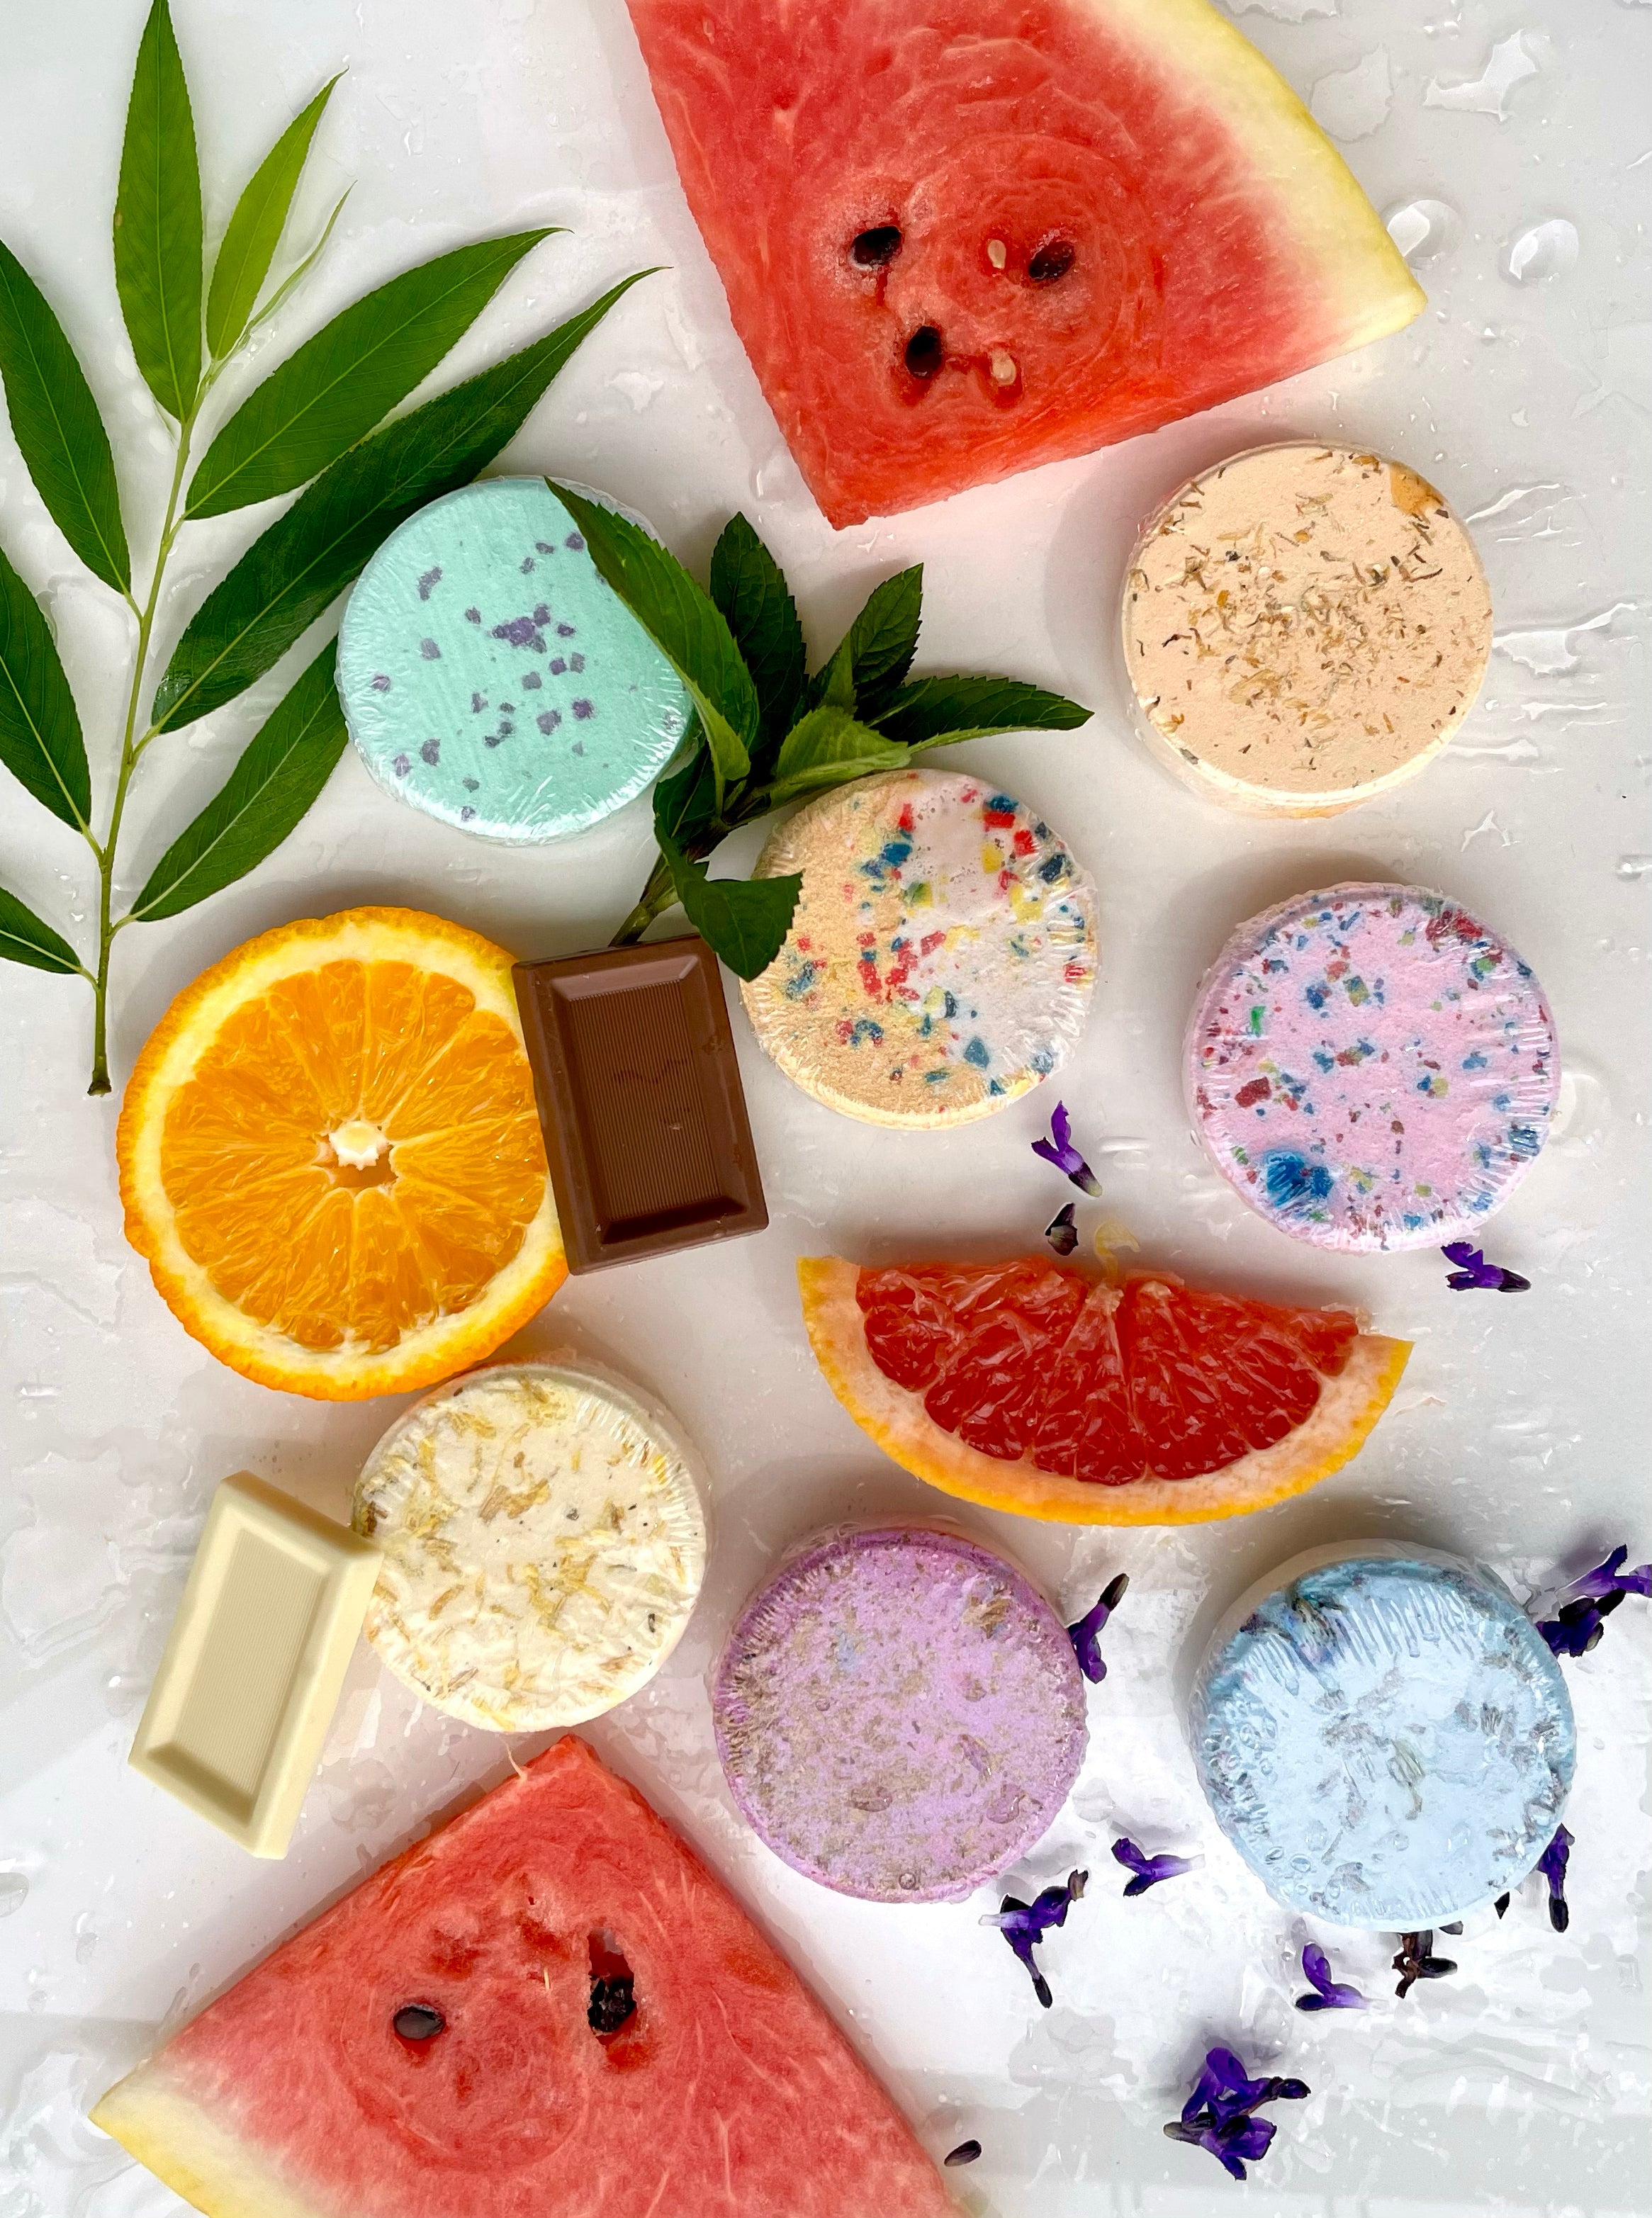 shower bombs for congestion lavender shower bombs eucalyptus shower bomb eucalyptus shower steamer lavender shower steamers menthol shower steamers shower steamers for congestion sinus shower steamers shower steamers eucalyptus